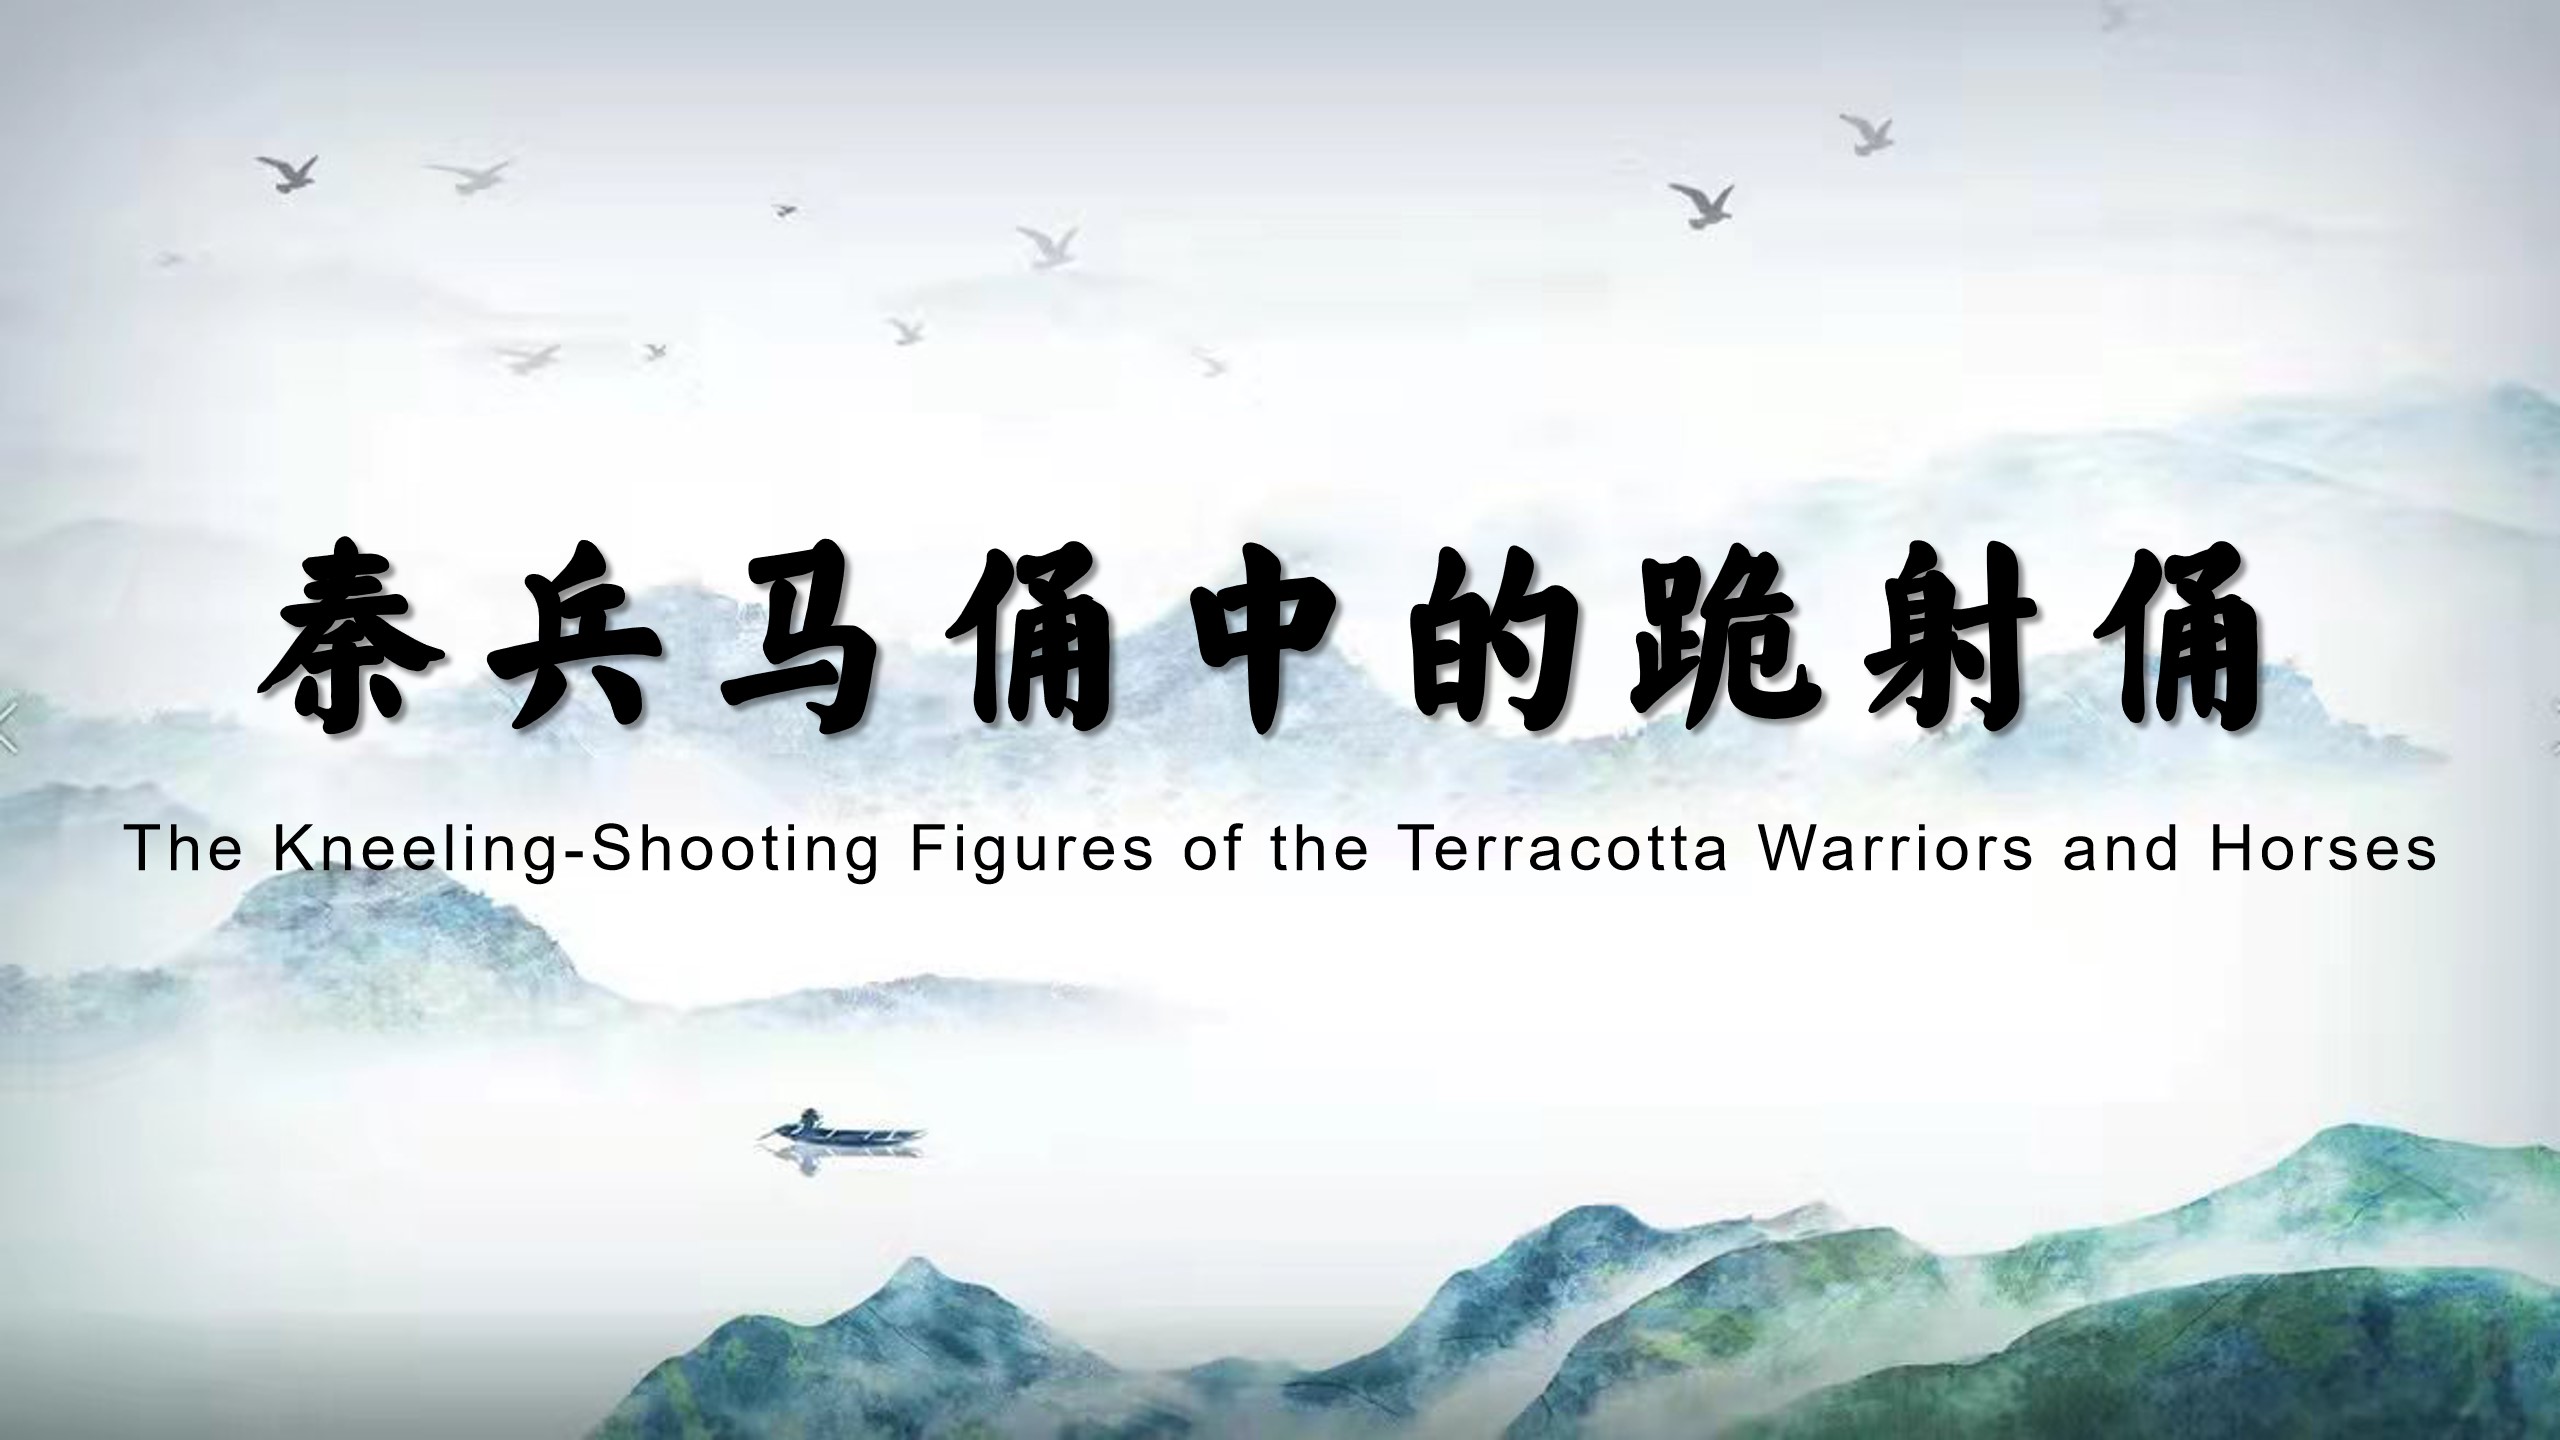 The Kneeling-Shooting Figures of the Terracotta Warriors and Horses